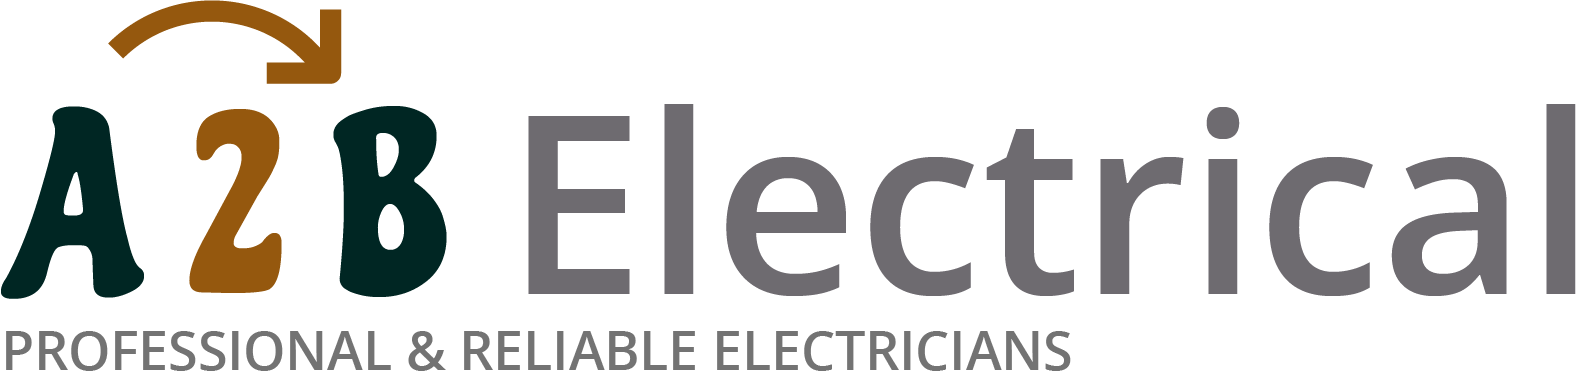 If you have electrical wiring problems in Fleet, we can provide an electrician to have a look for you. 